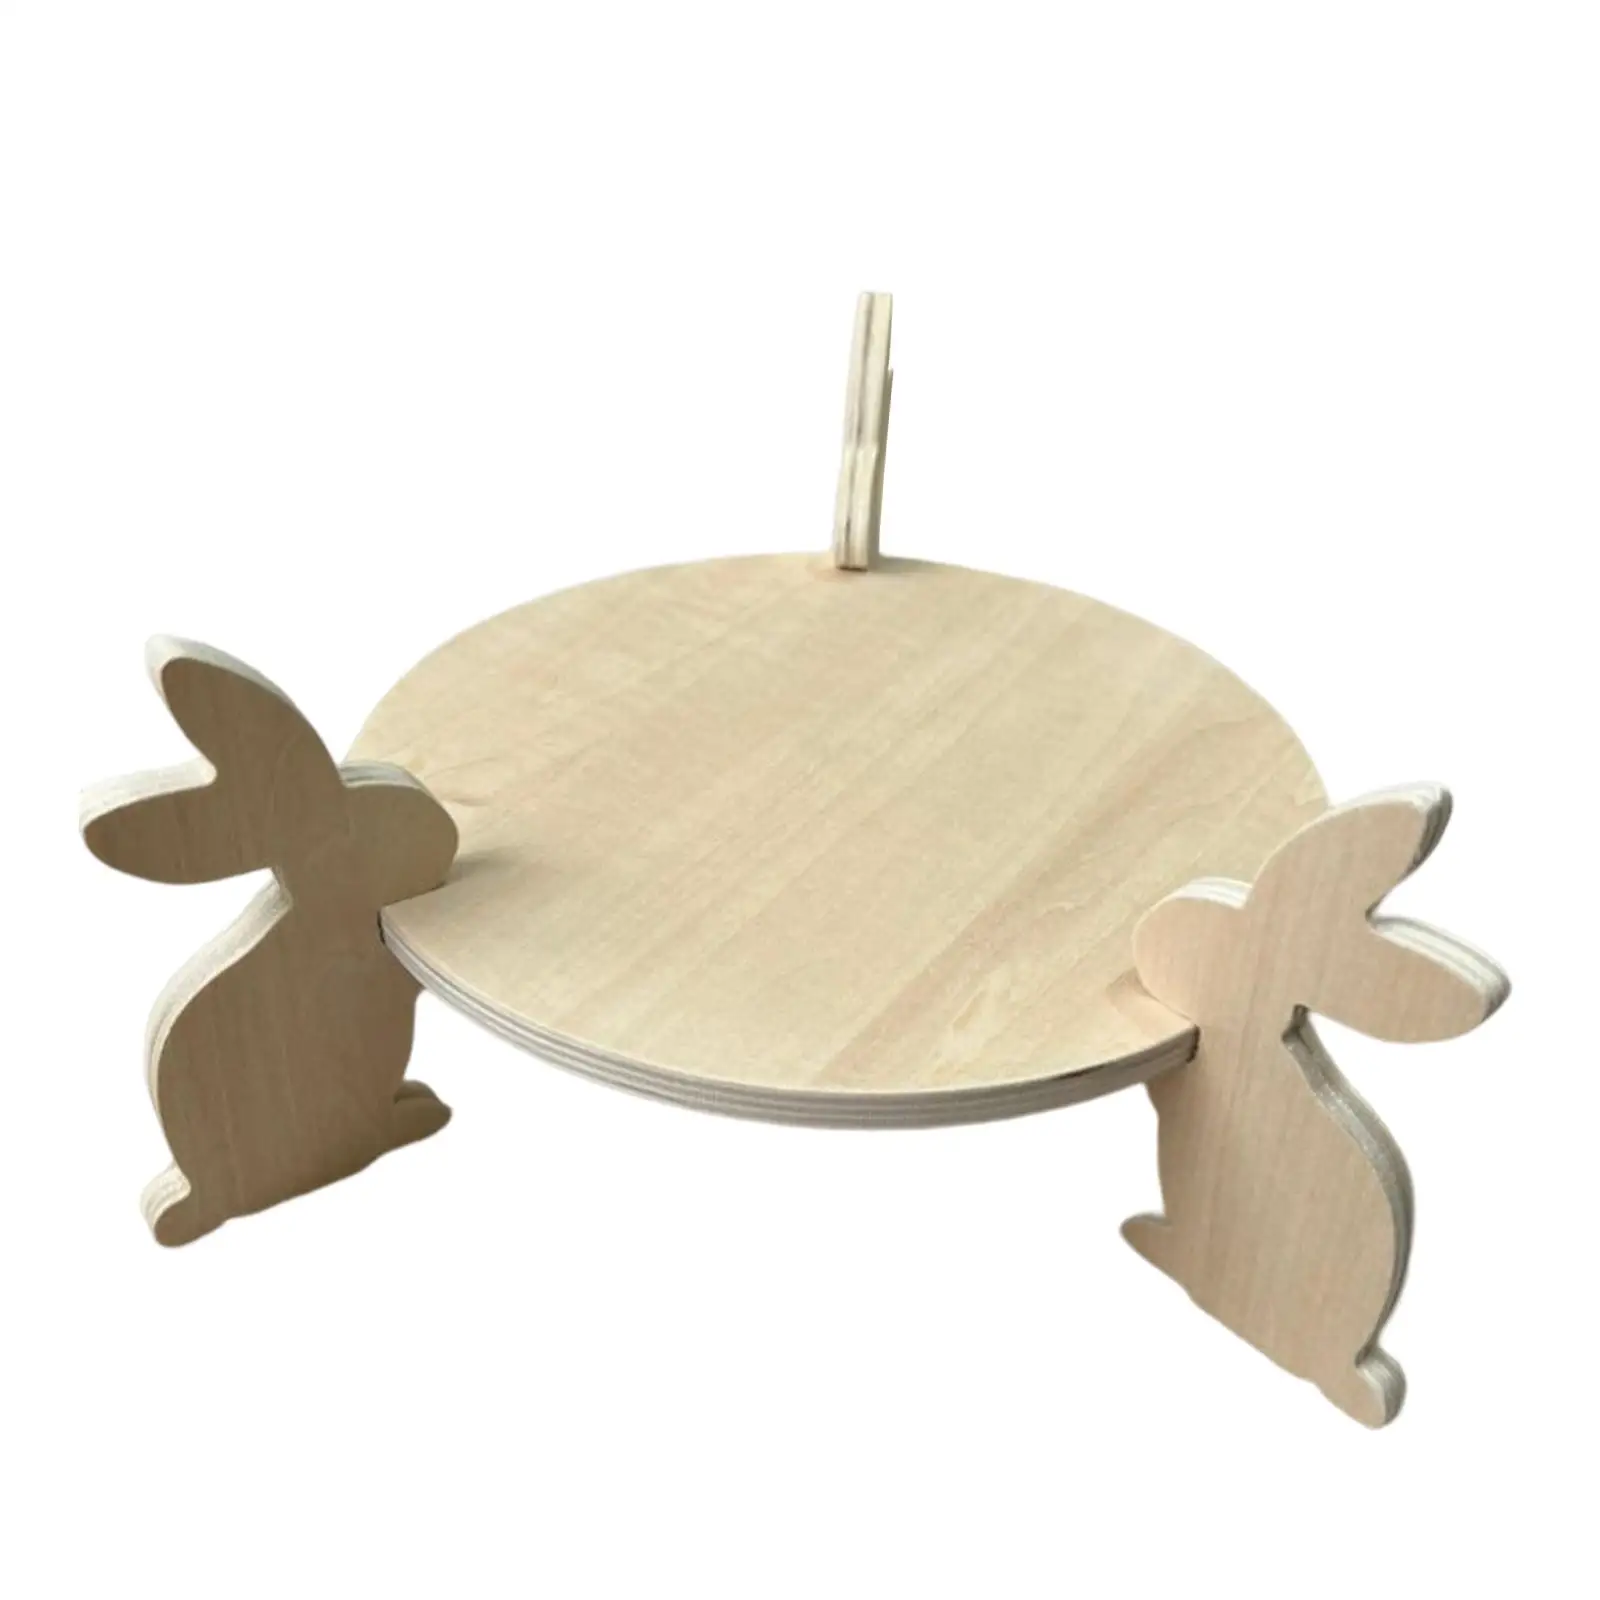 25cm Wooden Cupcake Pedestal Dessert Plates Cake Holder Serving Tray Wood Cake Stand for Holiday Birthday Party  Candle